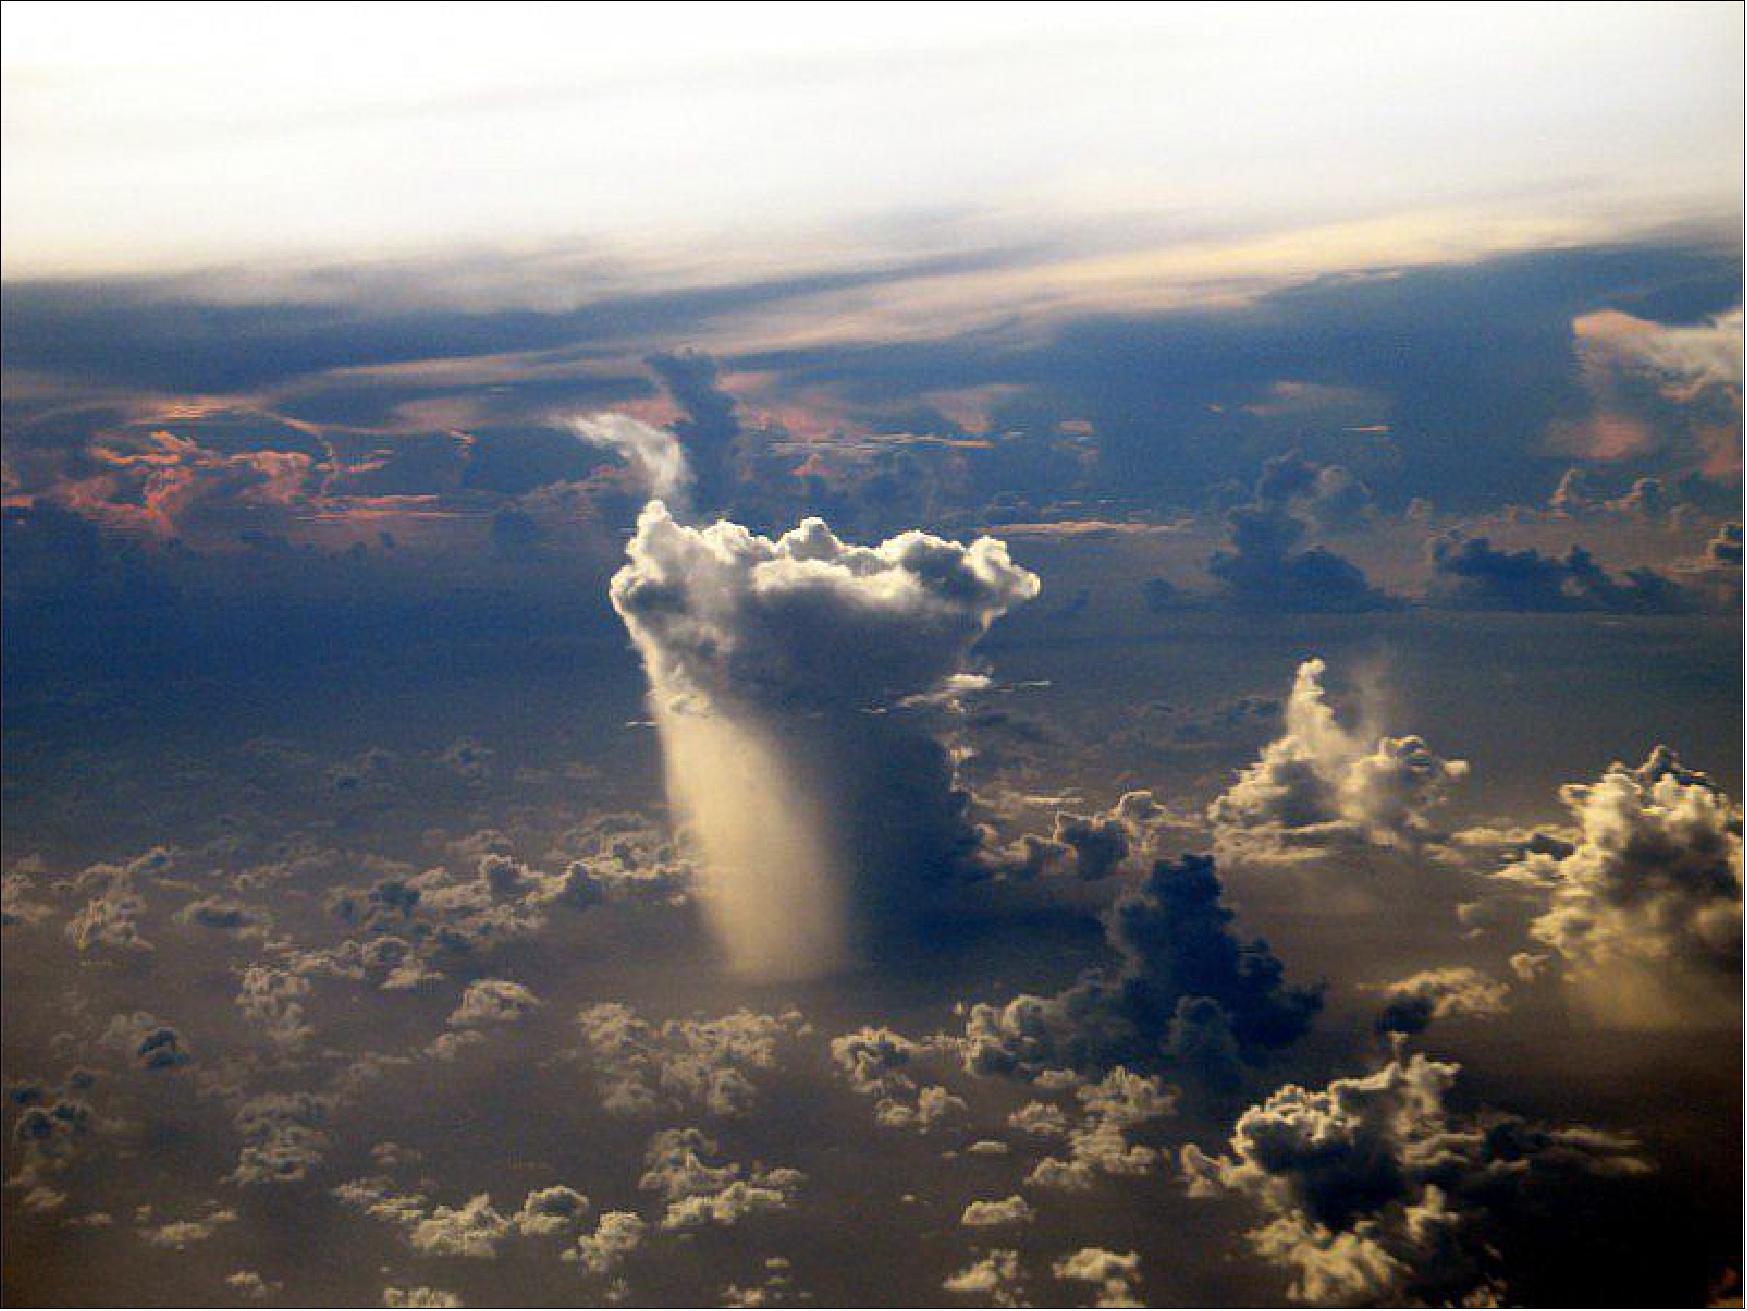 Figure 12: A lone storm cloud over the Pacific Ocean dumps freshwater into the sea (image credit: borto) 20)